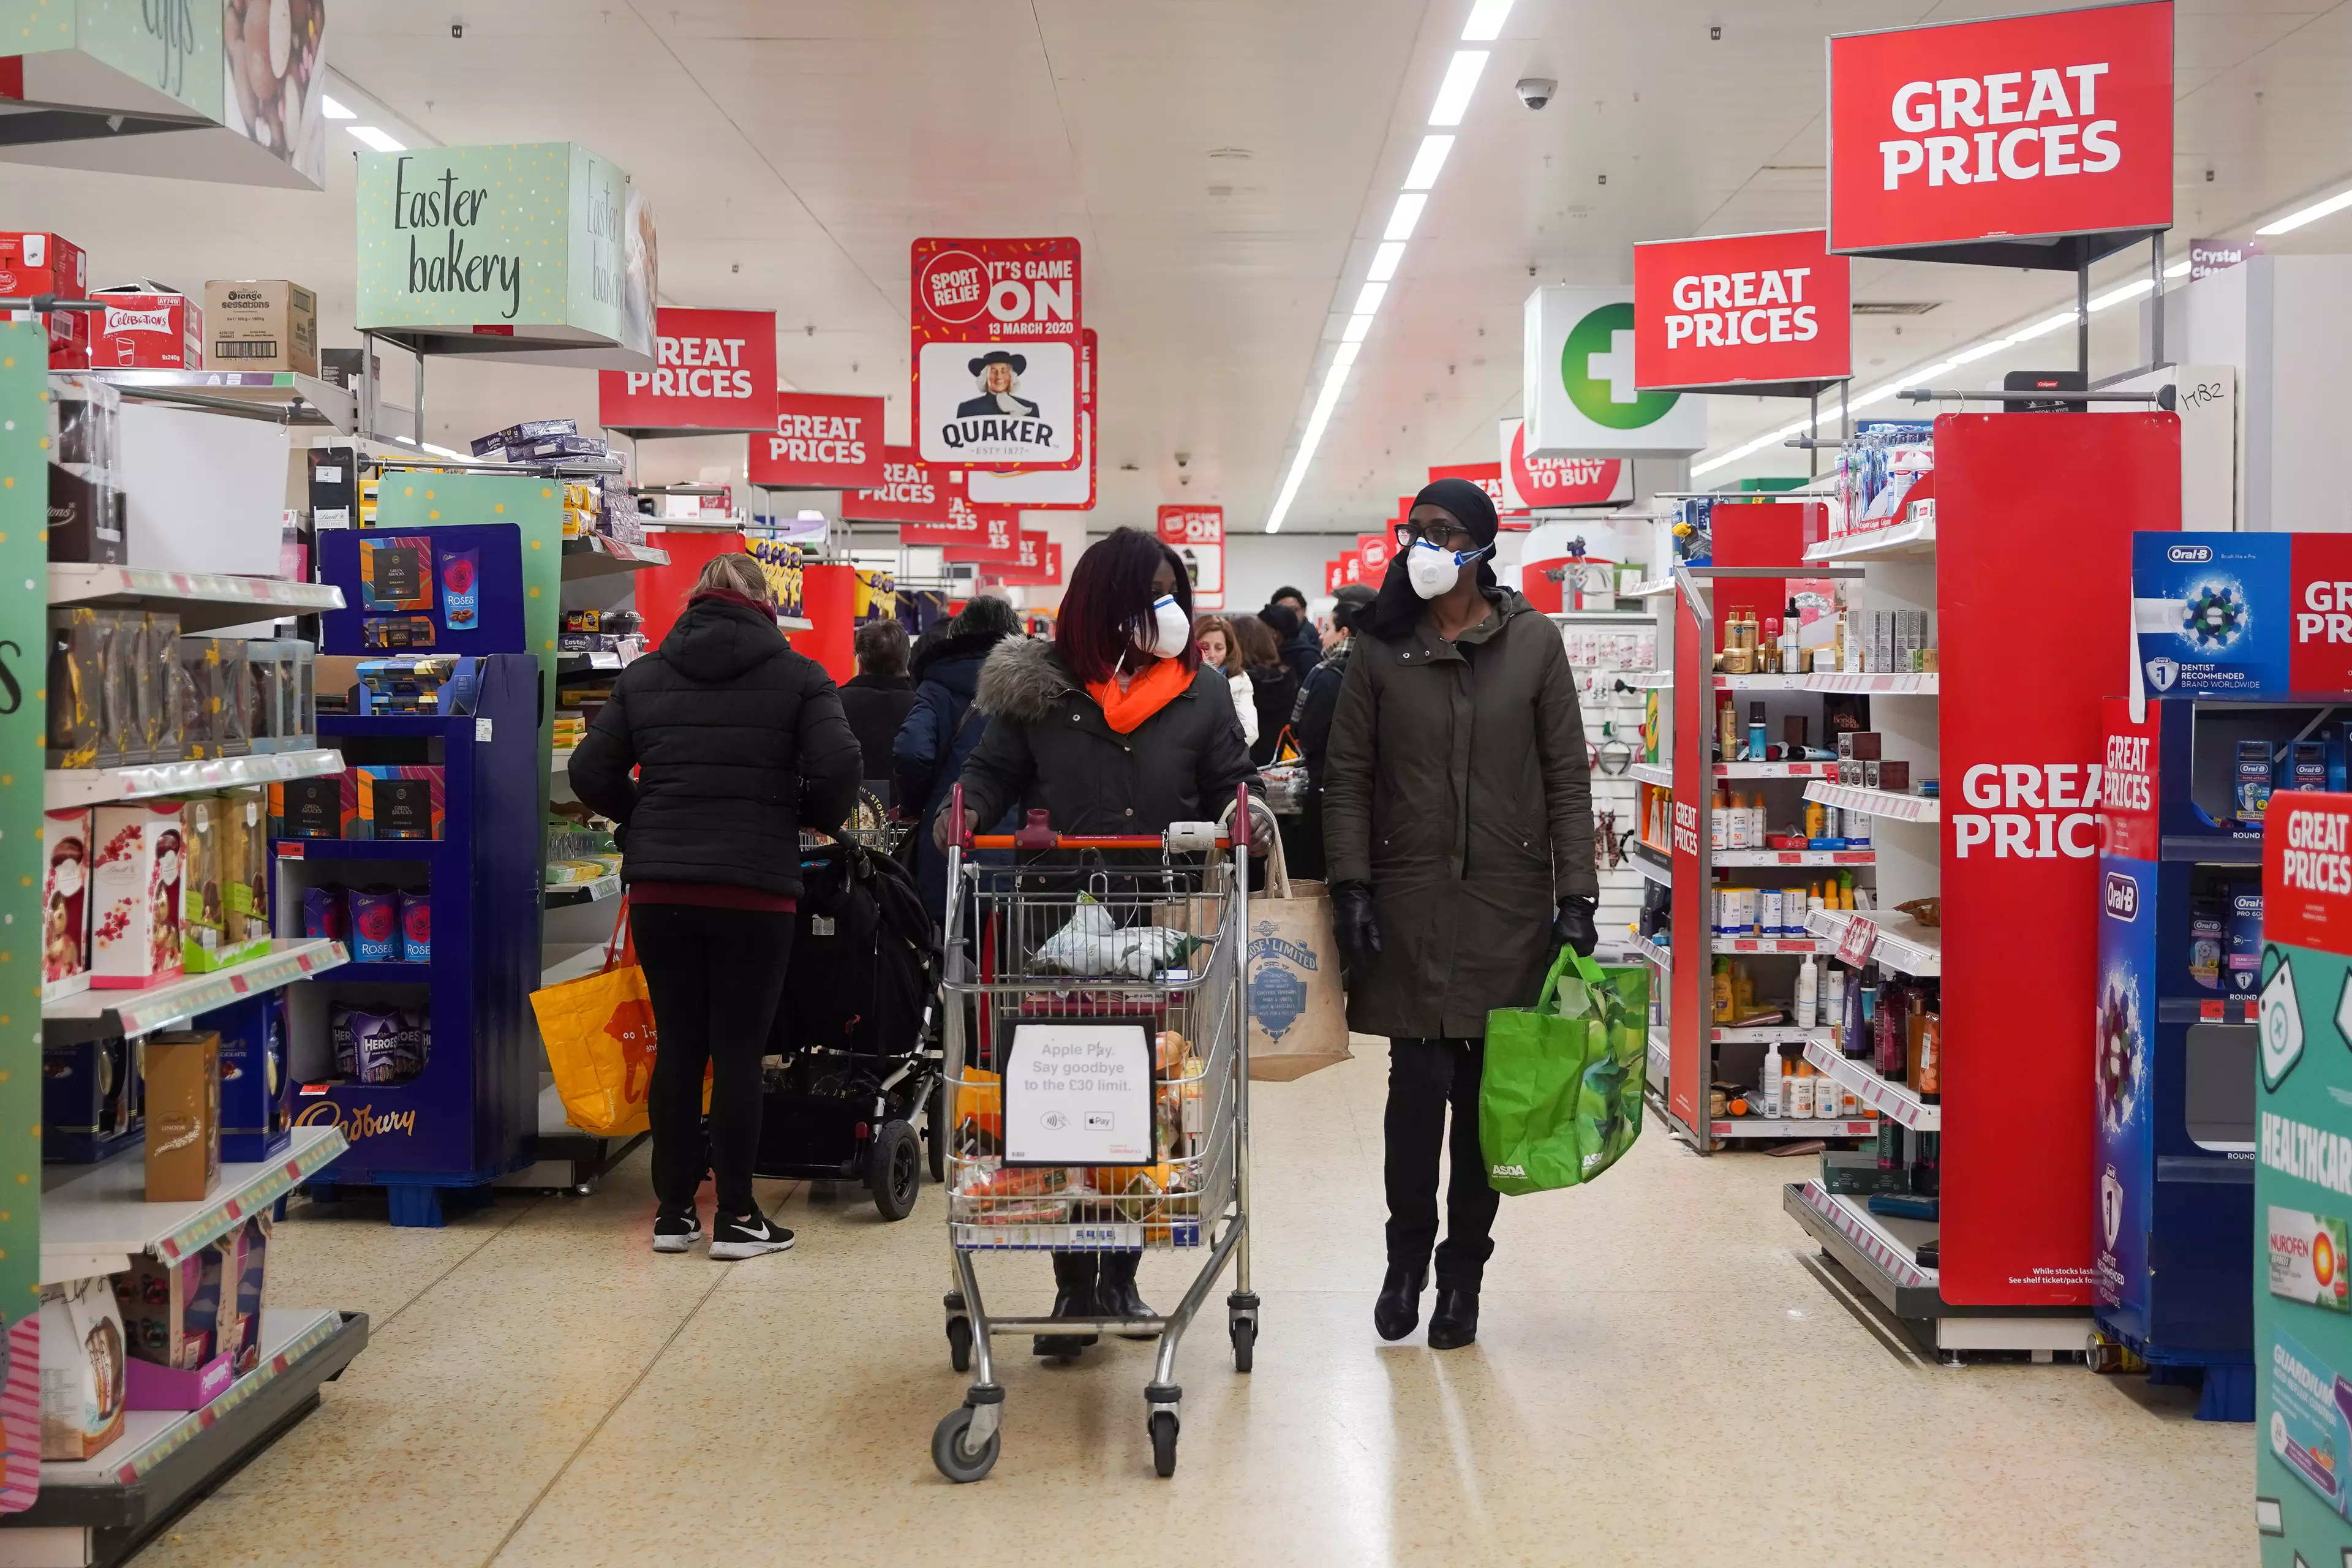 Supermarket chains and the UK government have assured the country that there is enough food and supplies to go around.